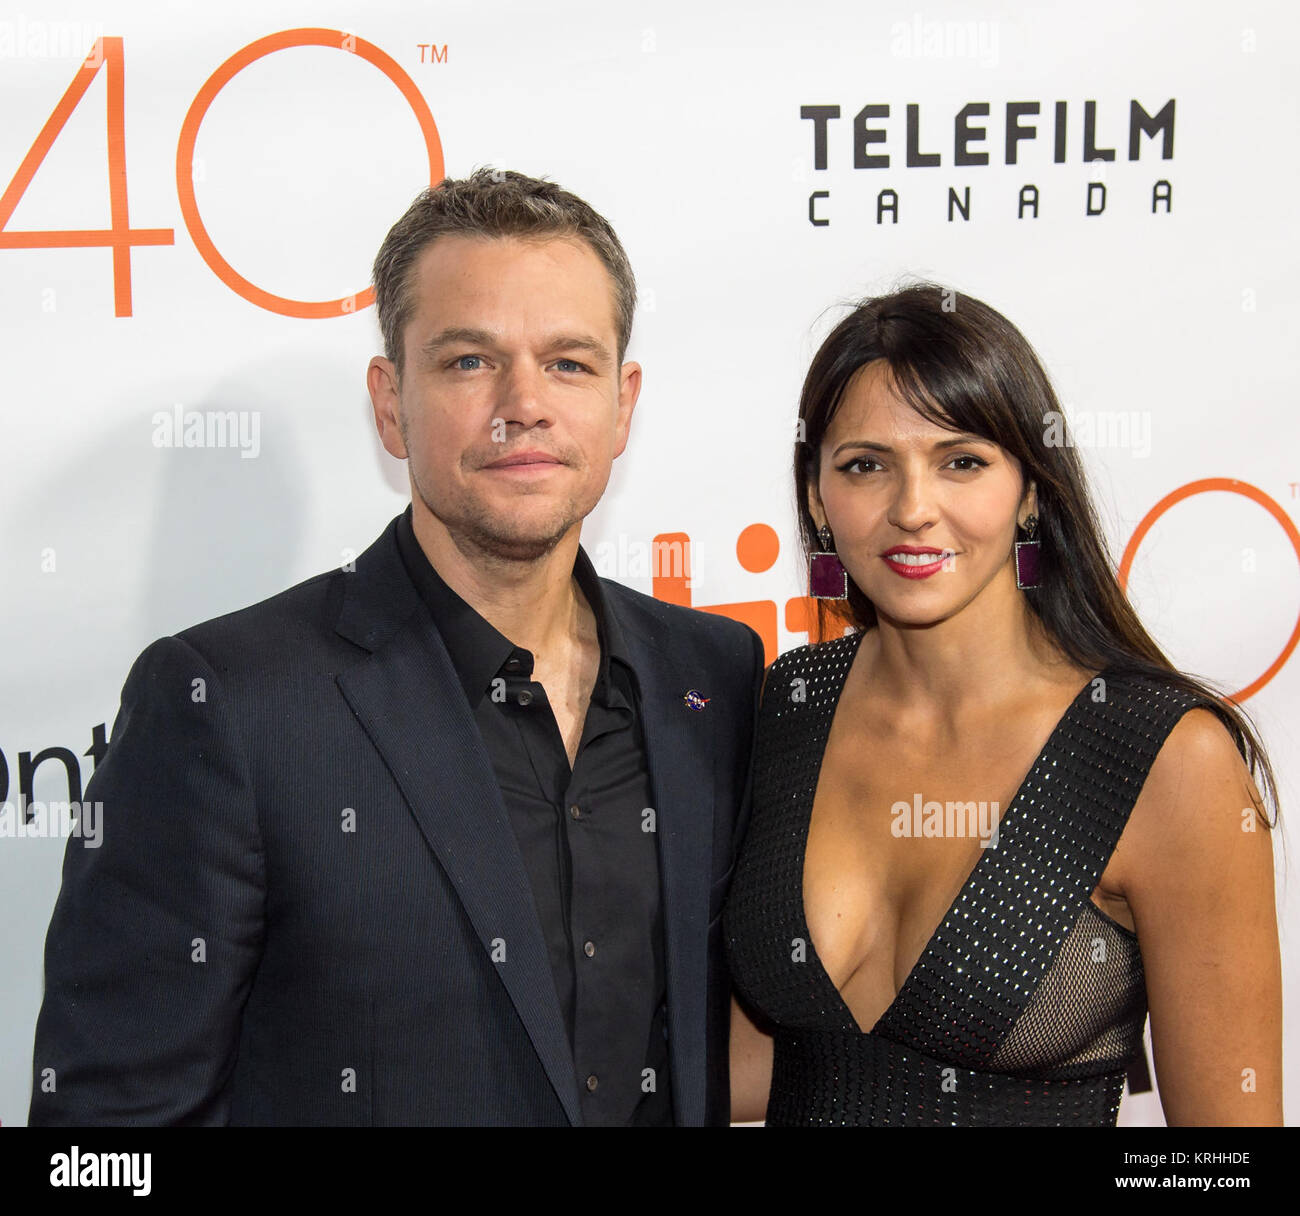 Actor Matt Damon and his wife Luciana Bozán Barroso attend the world premiere for 'The Martian” on day two of the Toronto International Film Festival at the Roy Thomson Hall Friday, Sept. 11, 2015 in Toronto. NASA scientists and engineers served as technical consultants on the film. The movie portrays a realistic view of the climate and topography of Mars, based on NASA data, and some of the challenges NASA faces as we prepare for human exploration of the Red Planet in the 2030s. Photo Credit: (NASA/Bill Ingalls) 'The Martian' World Premiere (NHQ201509110004) Stock Photo